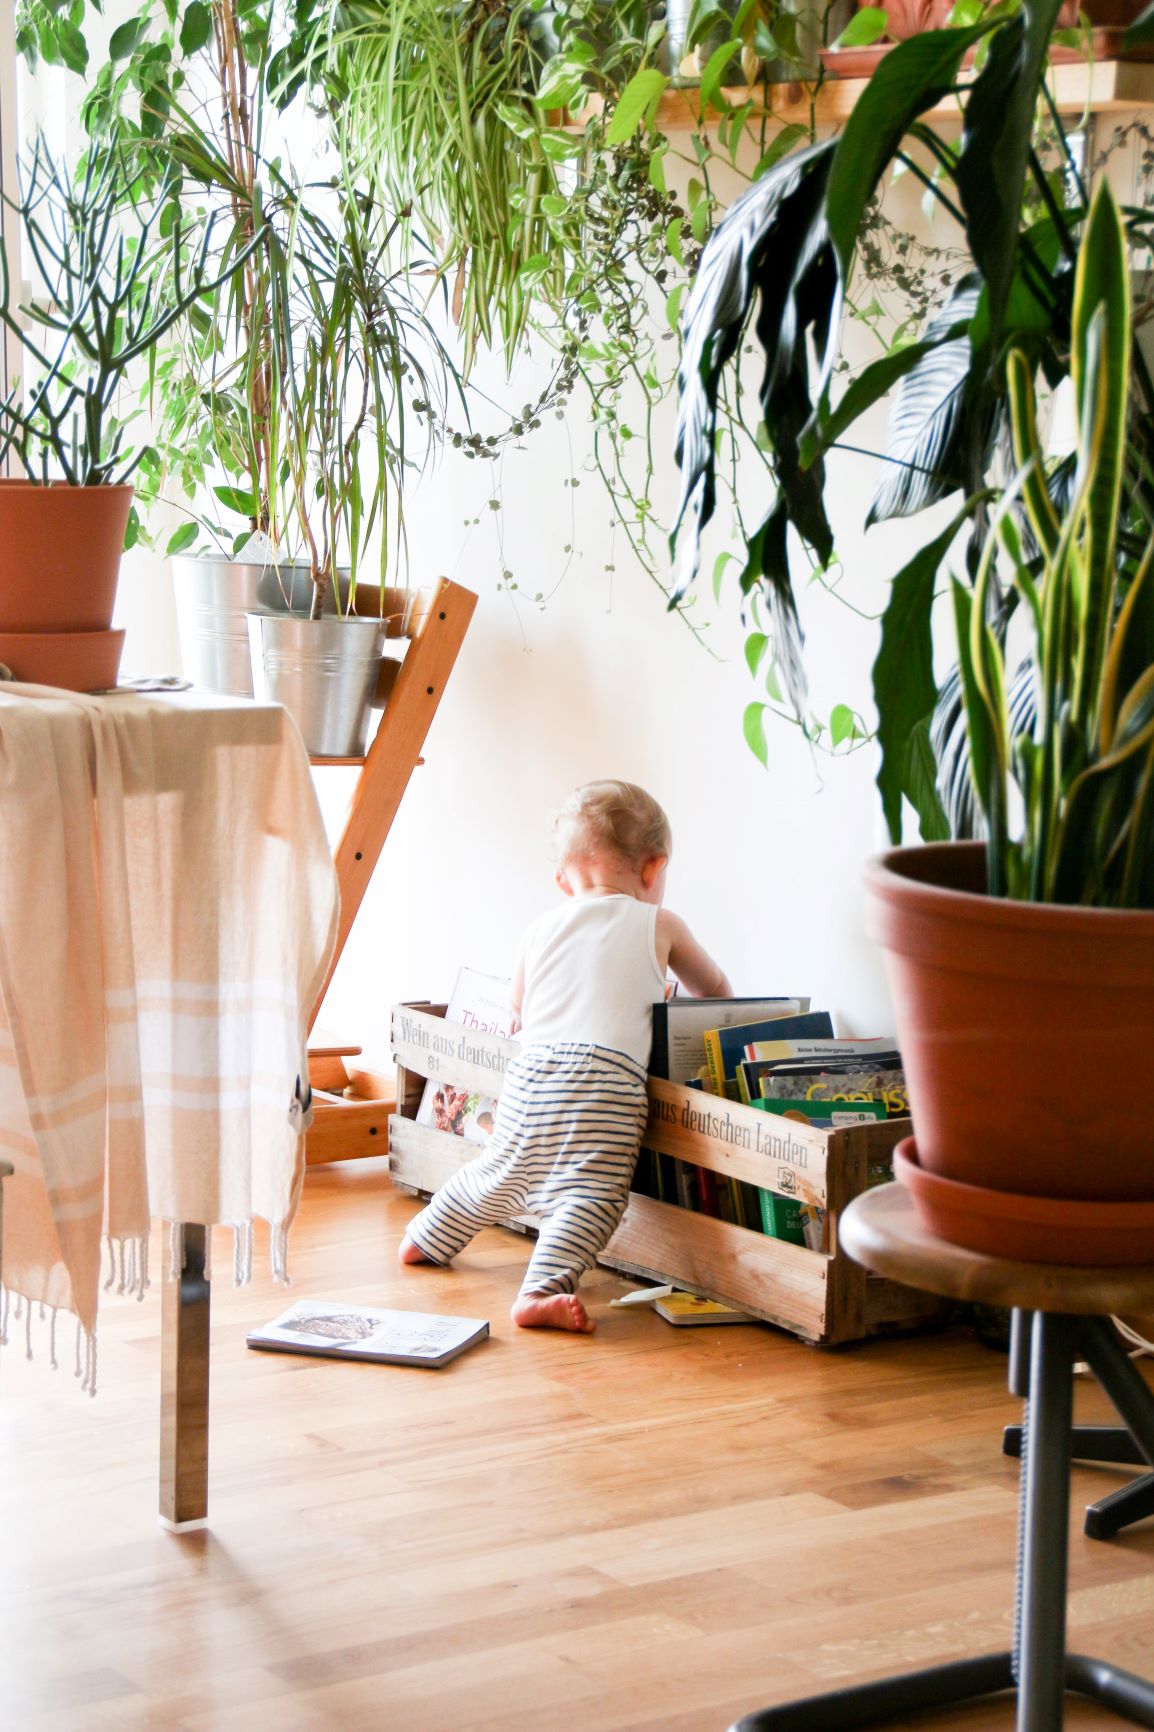 How To Make Your Home More Kid-Friendly